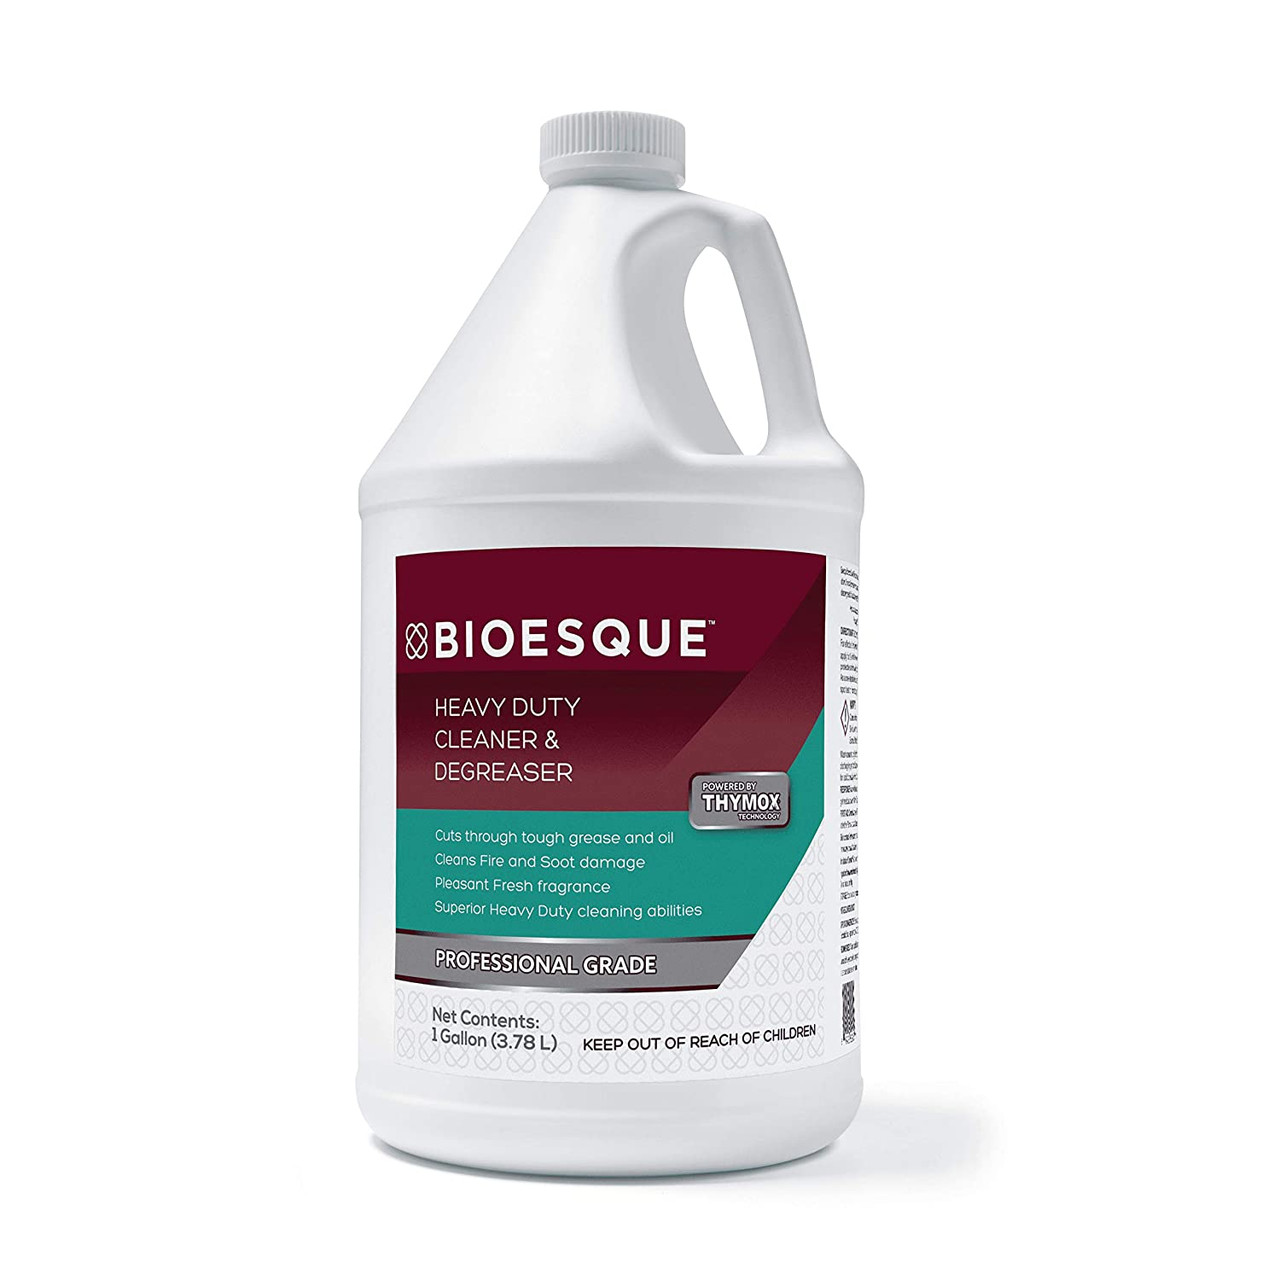 Bioesque Heavy Duty Cleaner & Degreaser